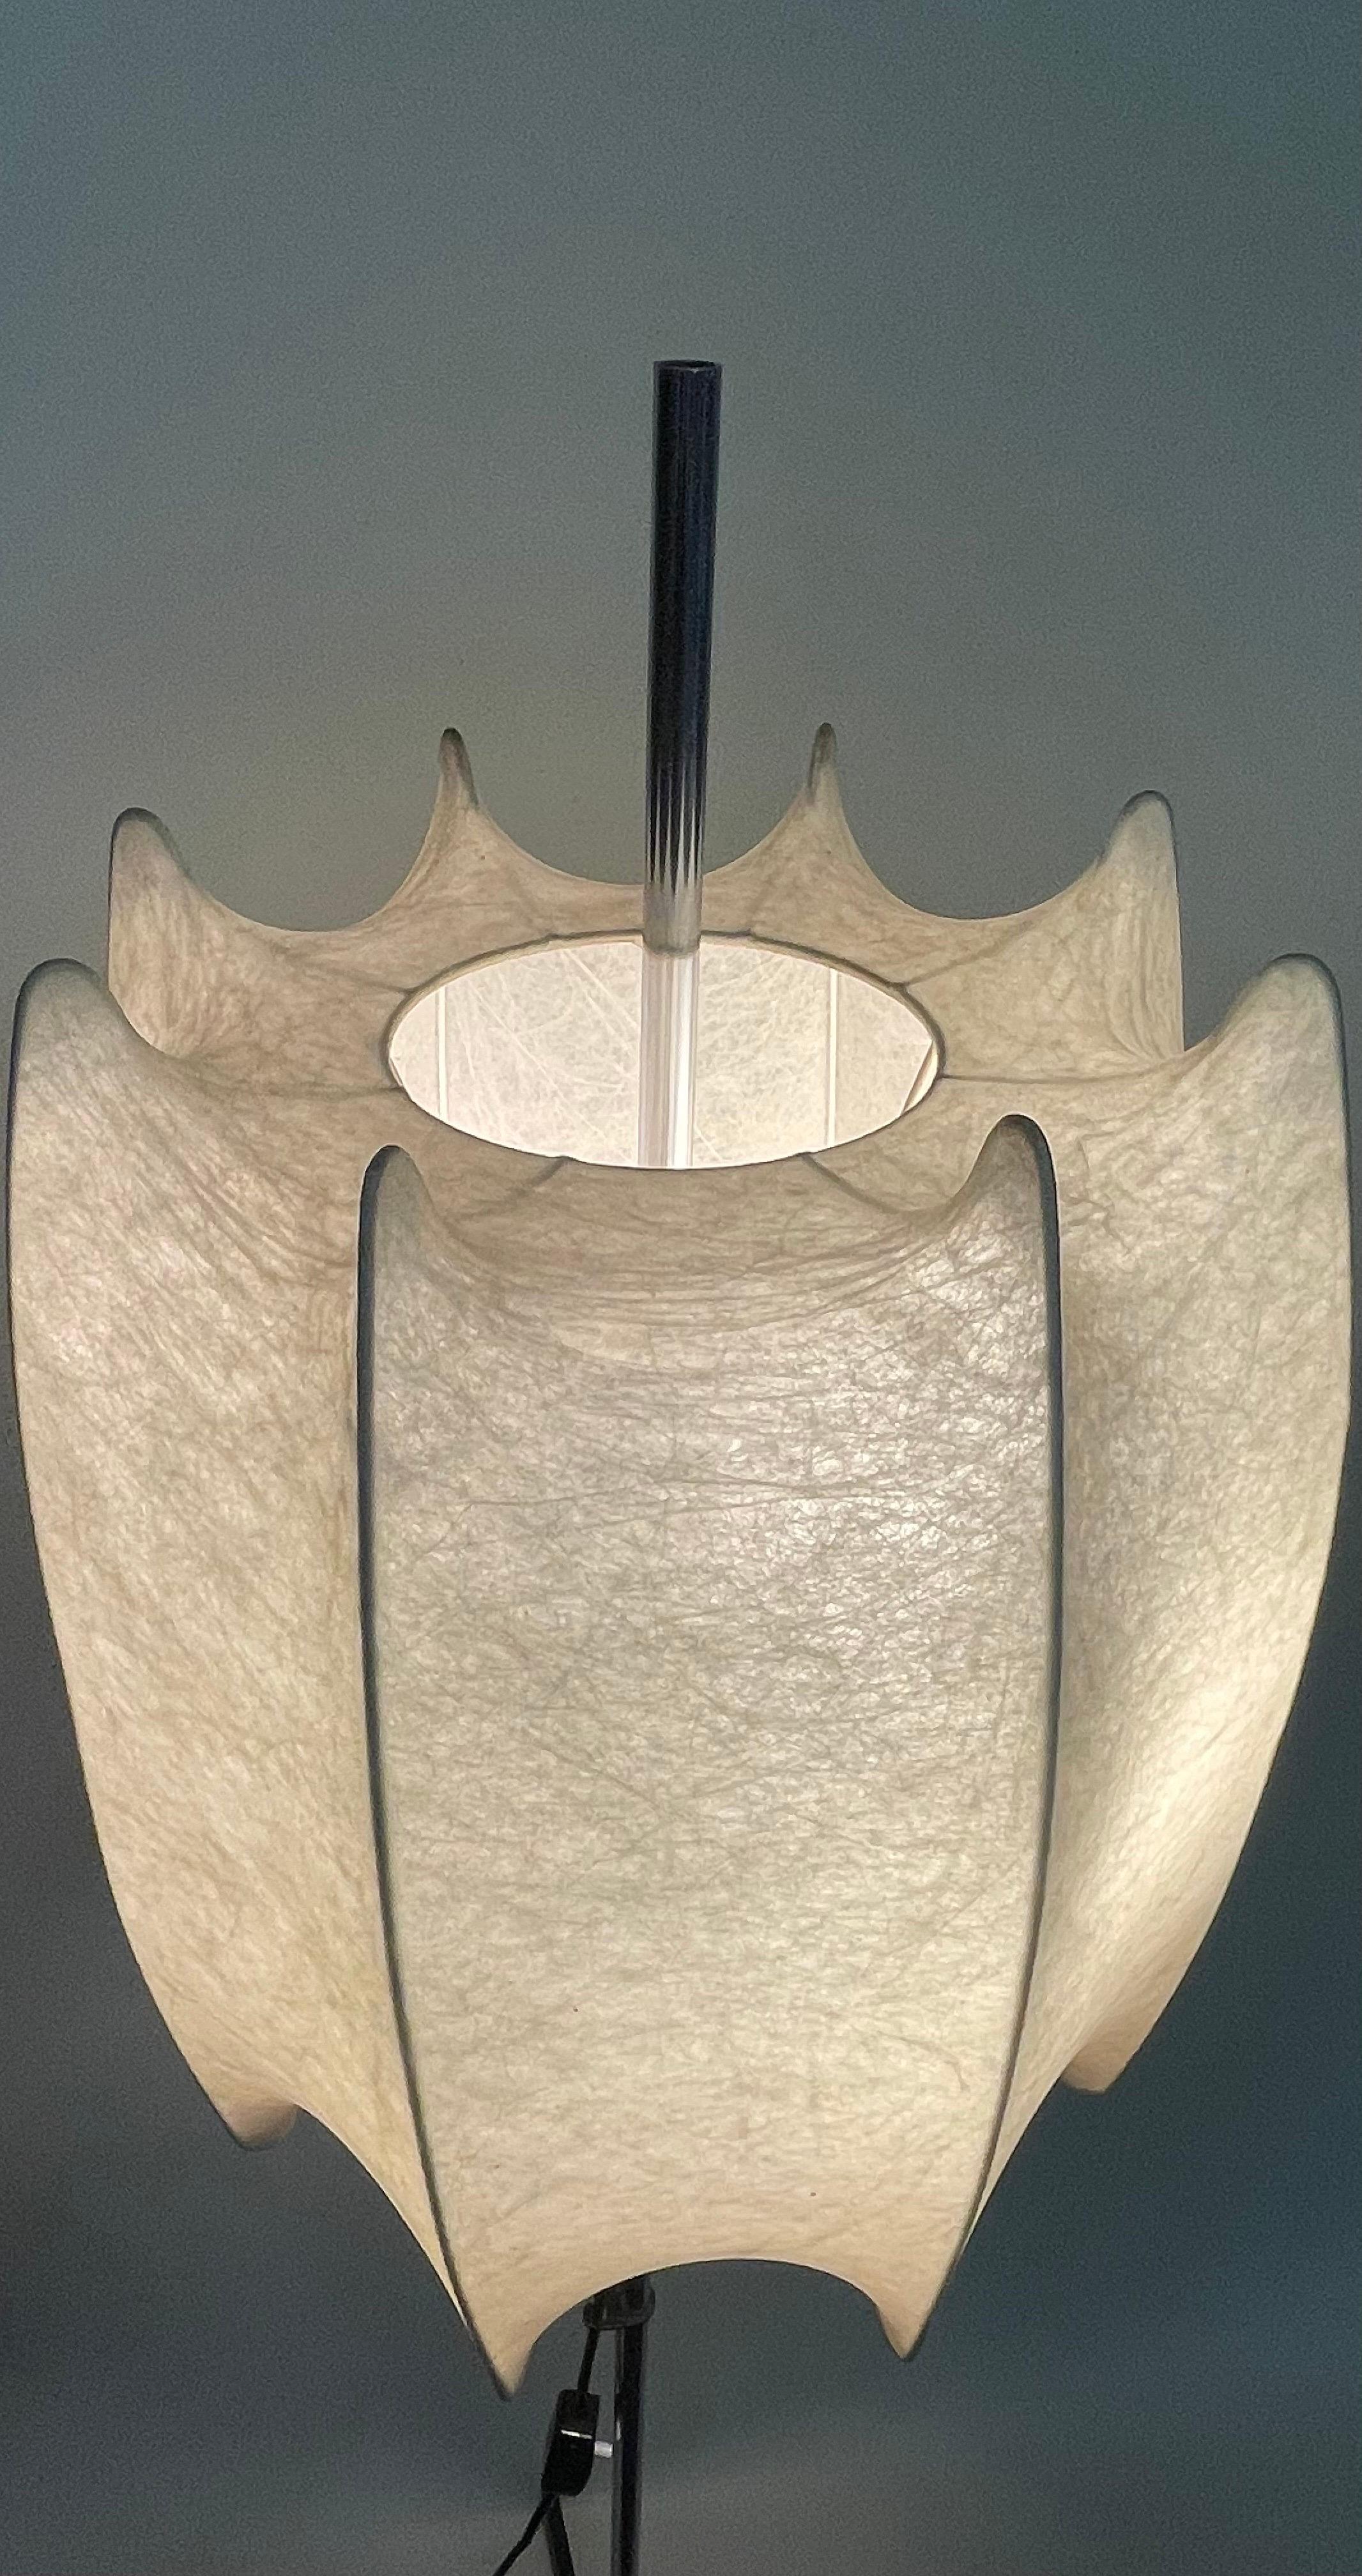 Midcentury Cocoon Floor Lamp Attributed to Goldkant Leuchten, circa 1960s For Sale 2